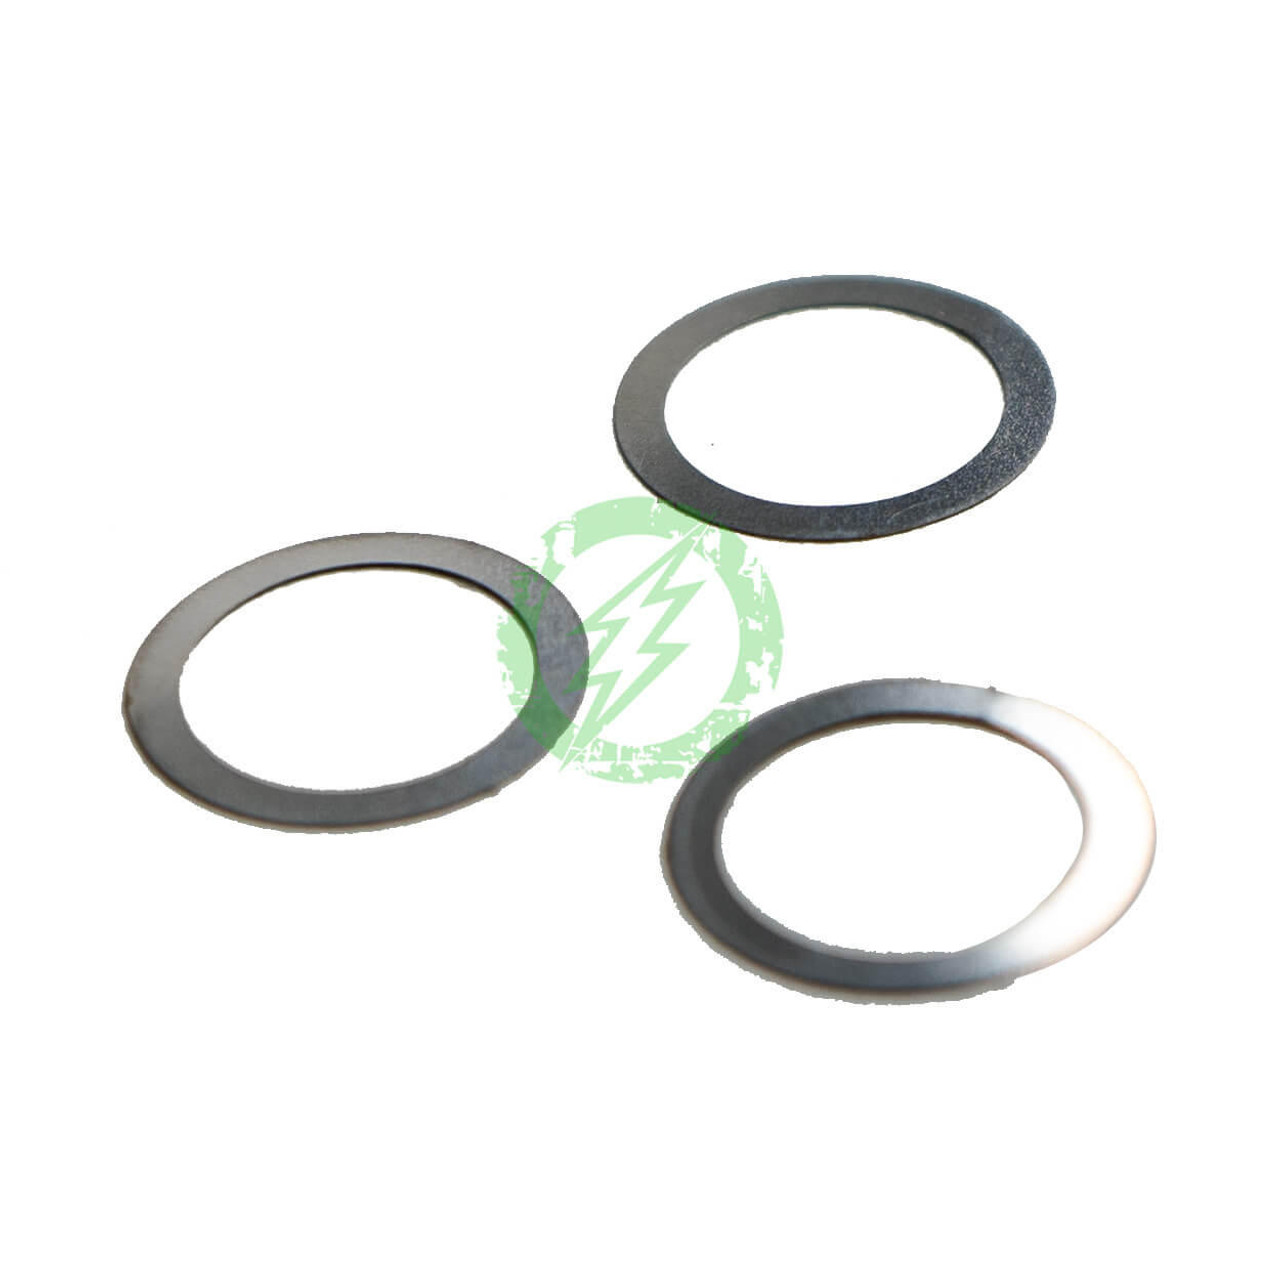  Airsoft Parts Shims for Hop Up Chamber | 0.1mm Thick / Pack of 3 